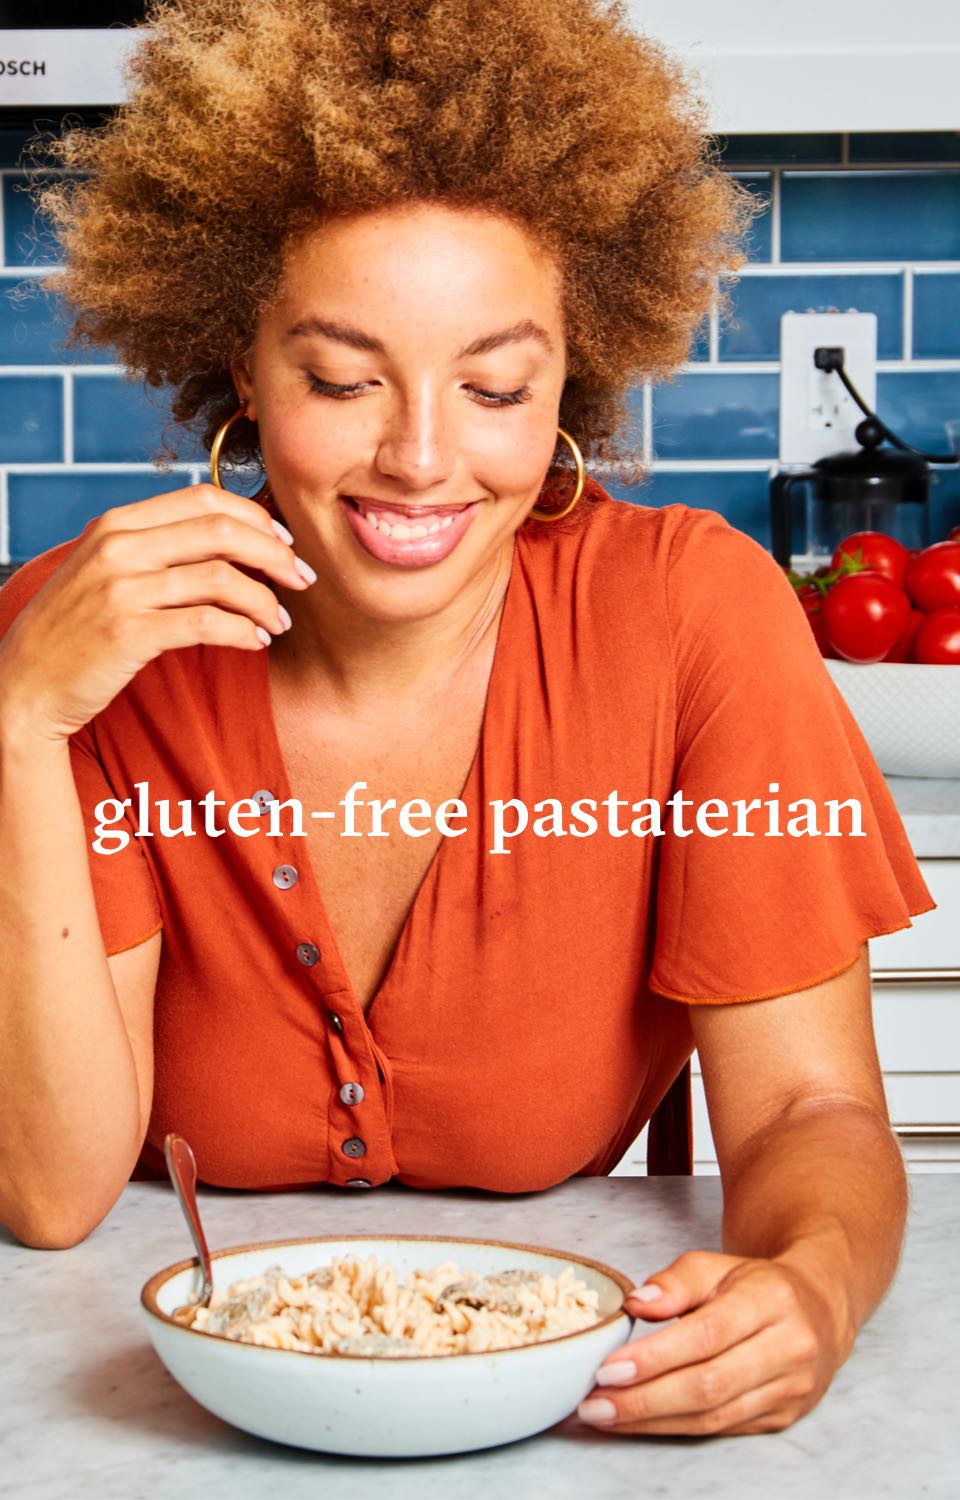 Woman in a kitchen eating a bowl of food. Headline reads Gluten-free Pastaterian